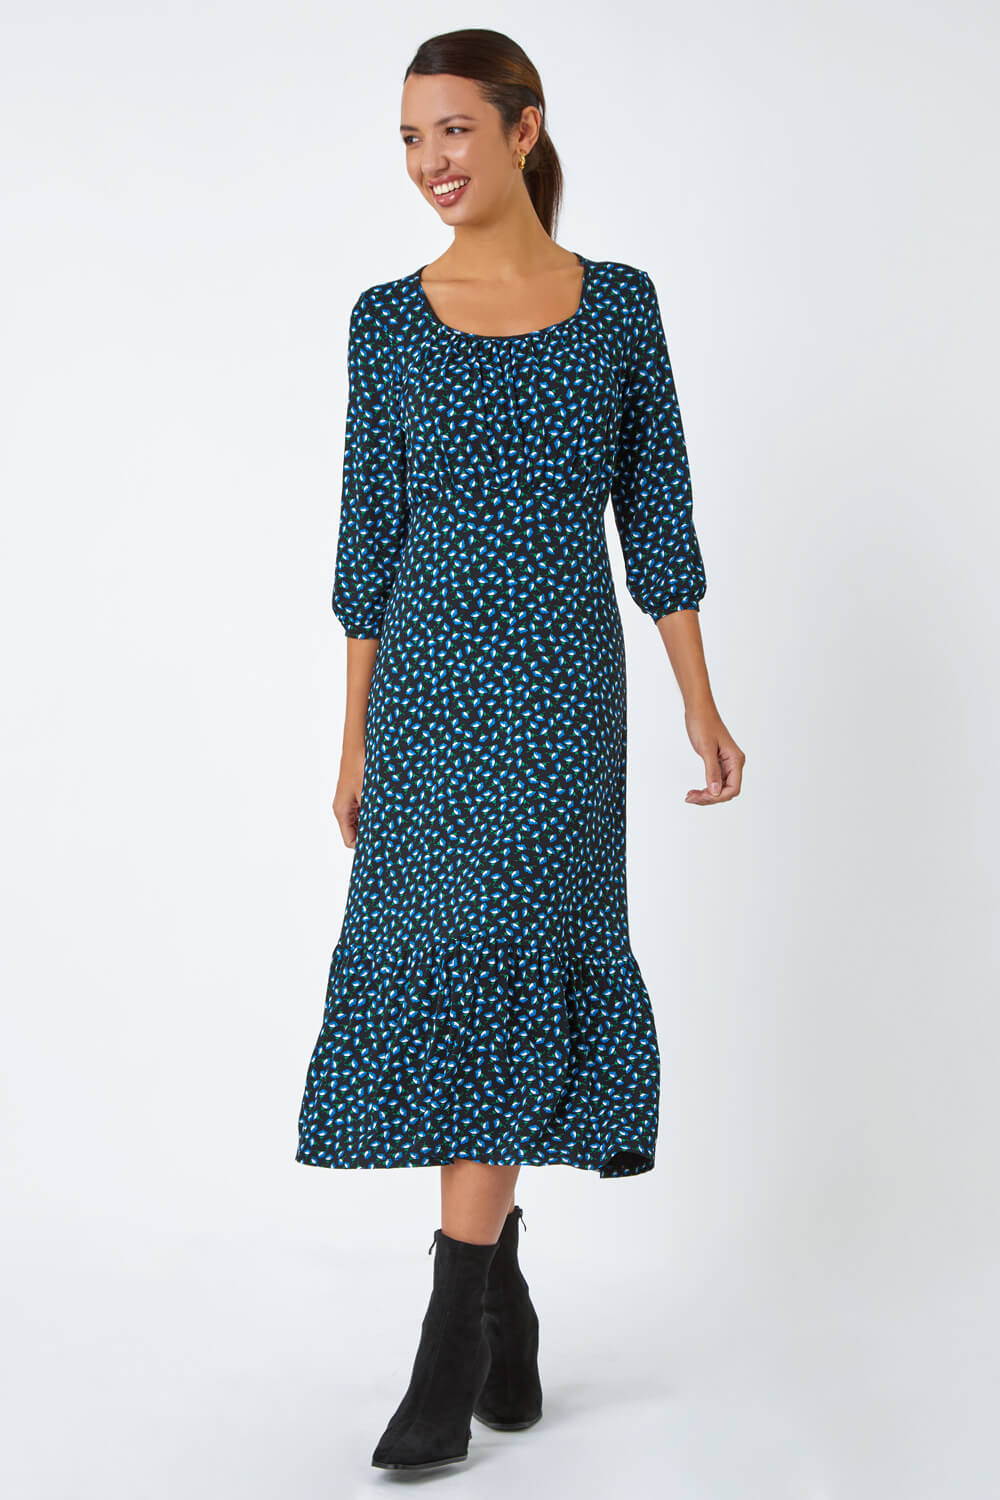 Blue Ditsy Floral Frill Stretch Midi Dress, Image 2 of 5